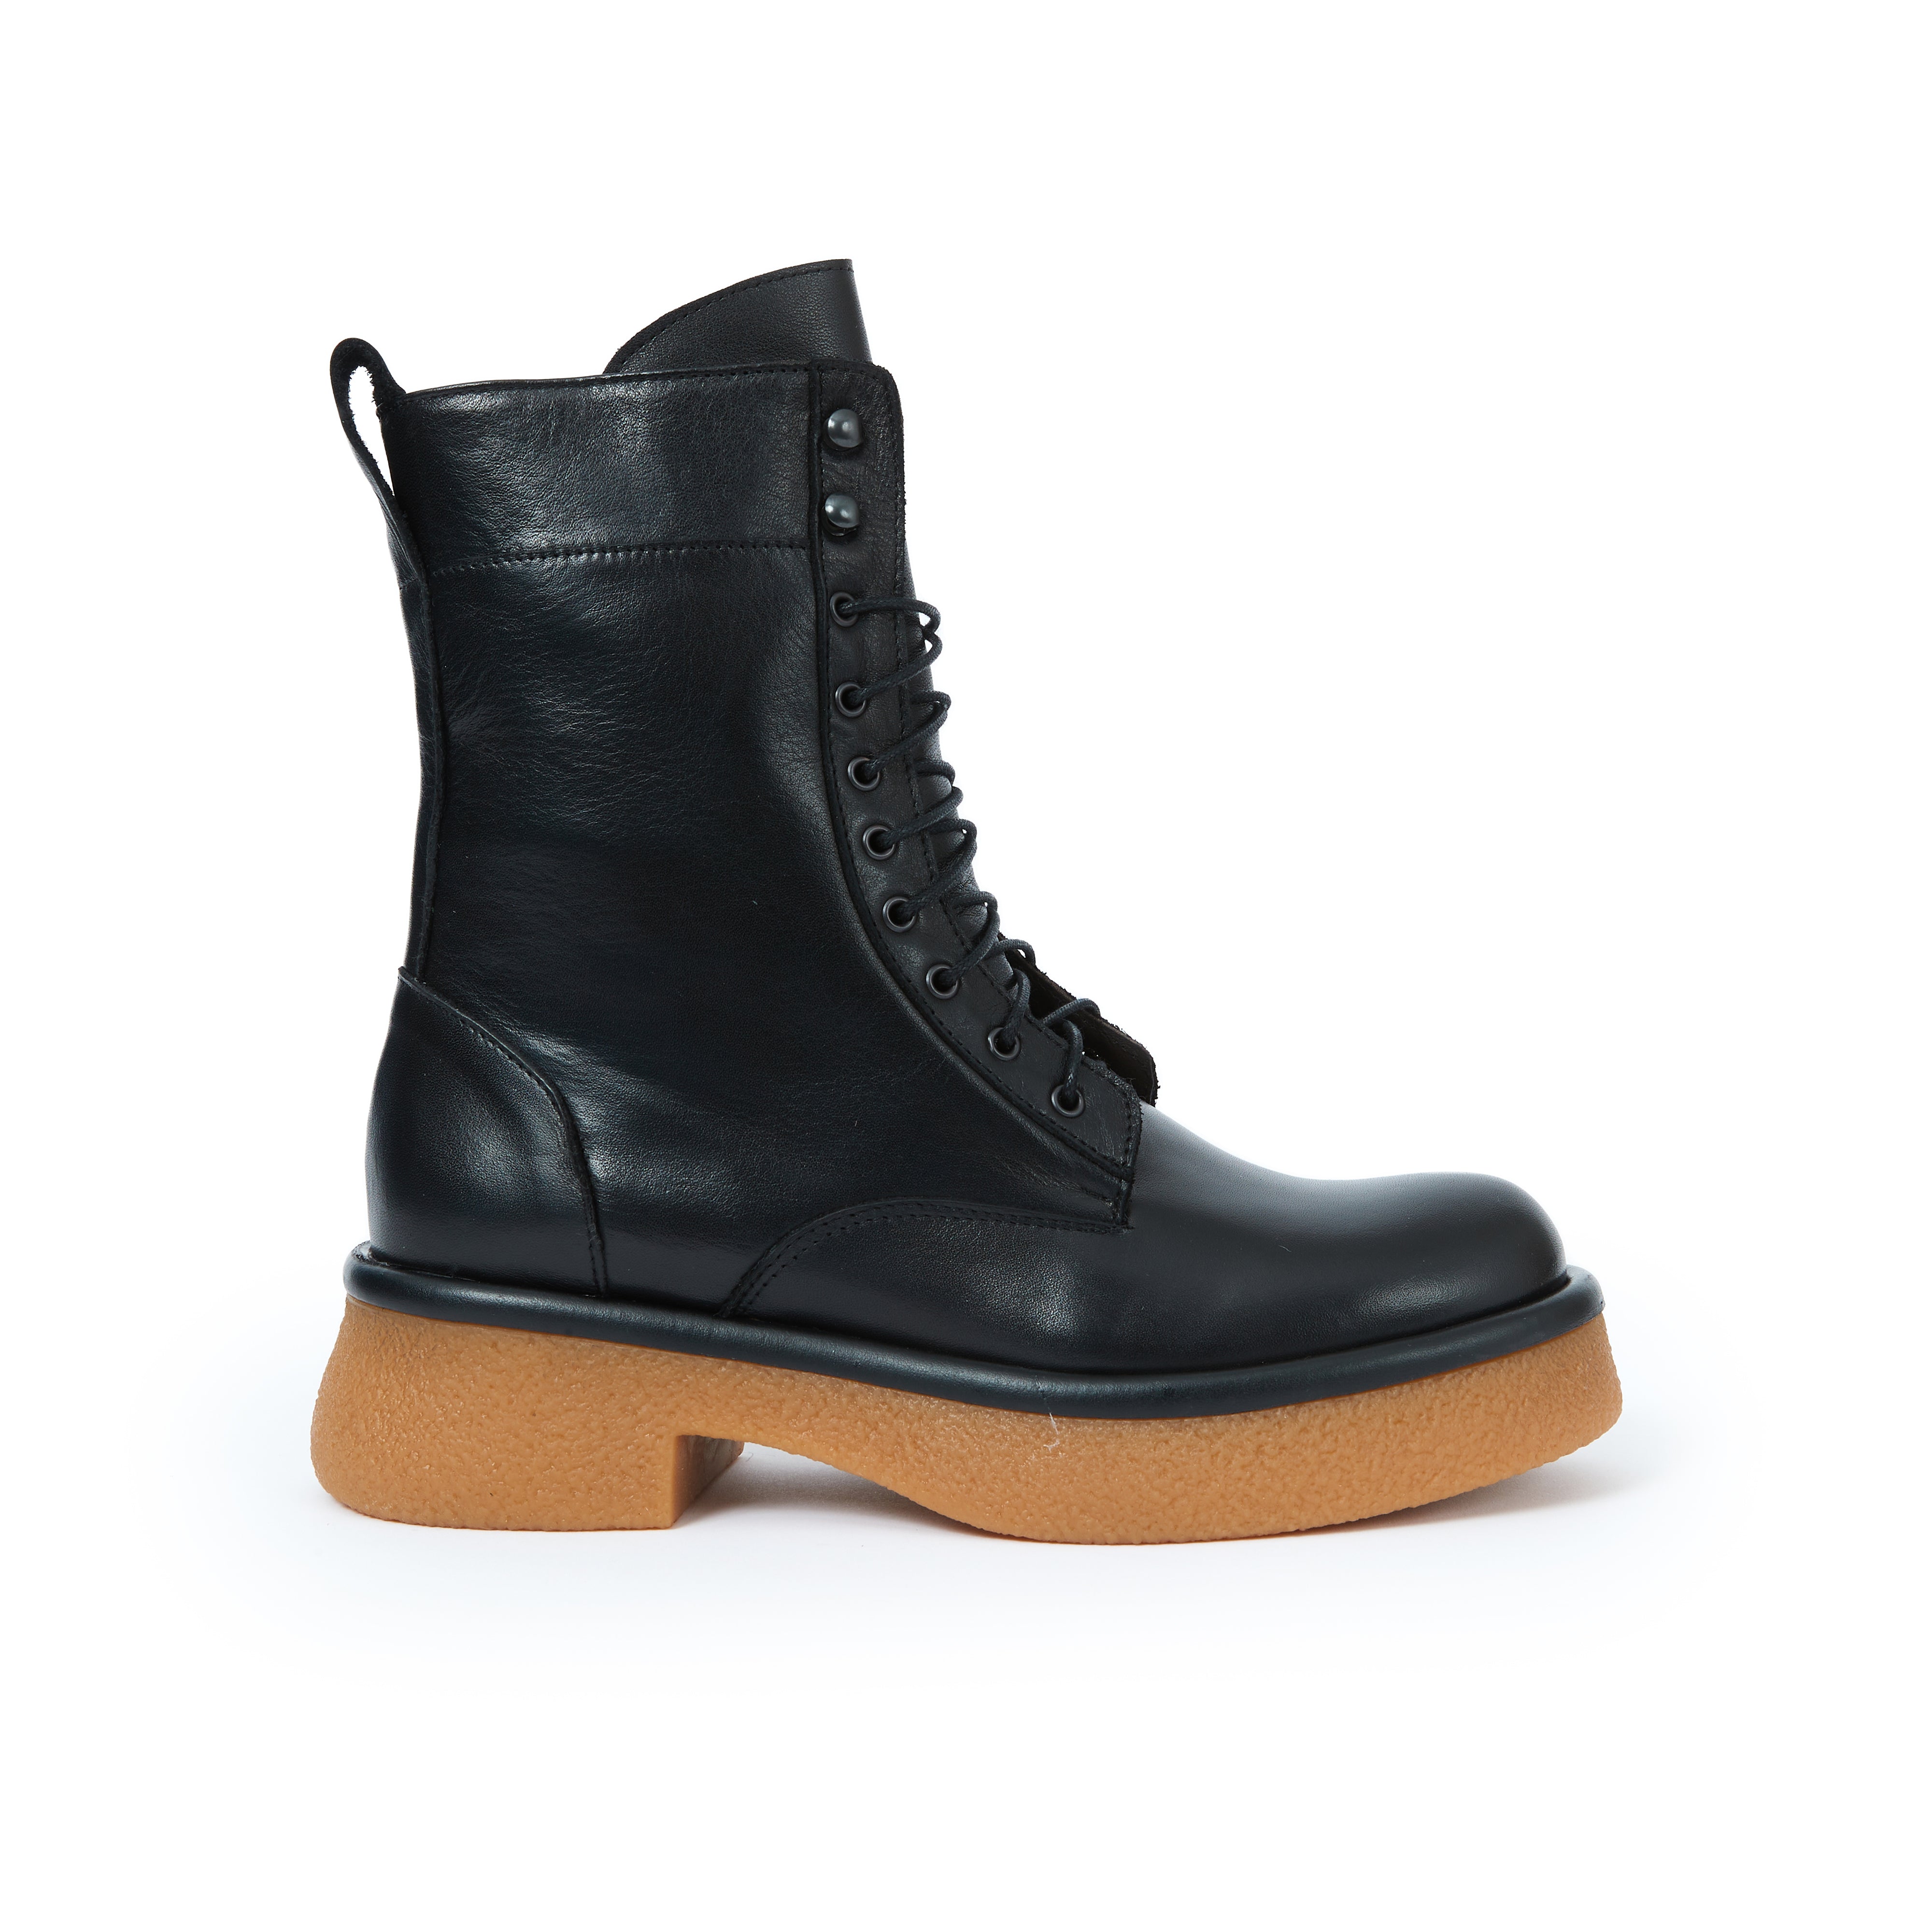 Lace-Up boot black